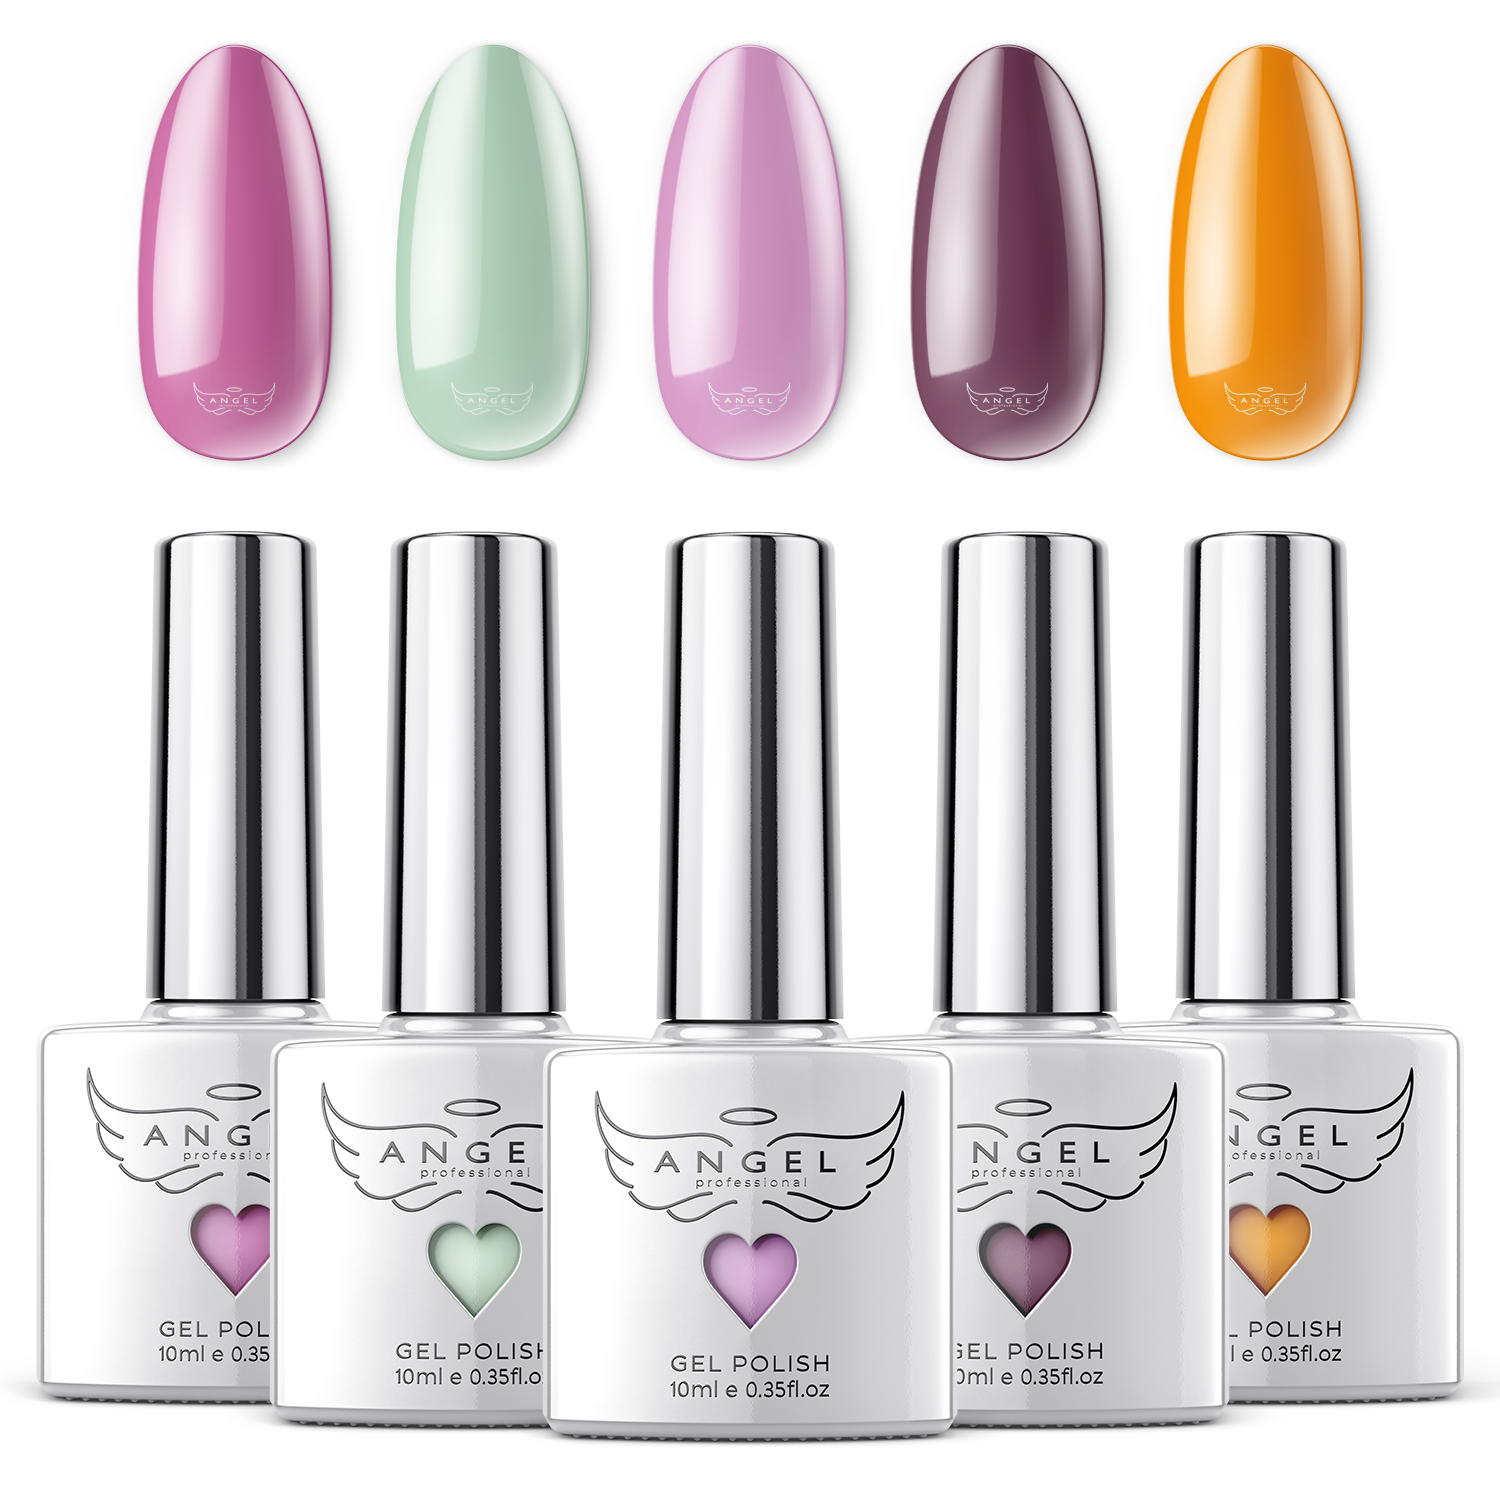 Nail Polish Set "Orchid" with 5 Popular Colors, Manicure Gel Polis – angel-professional